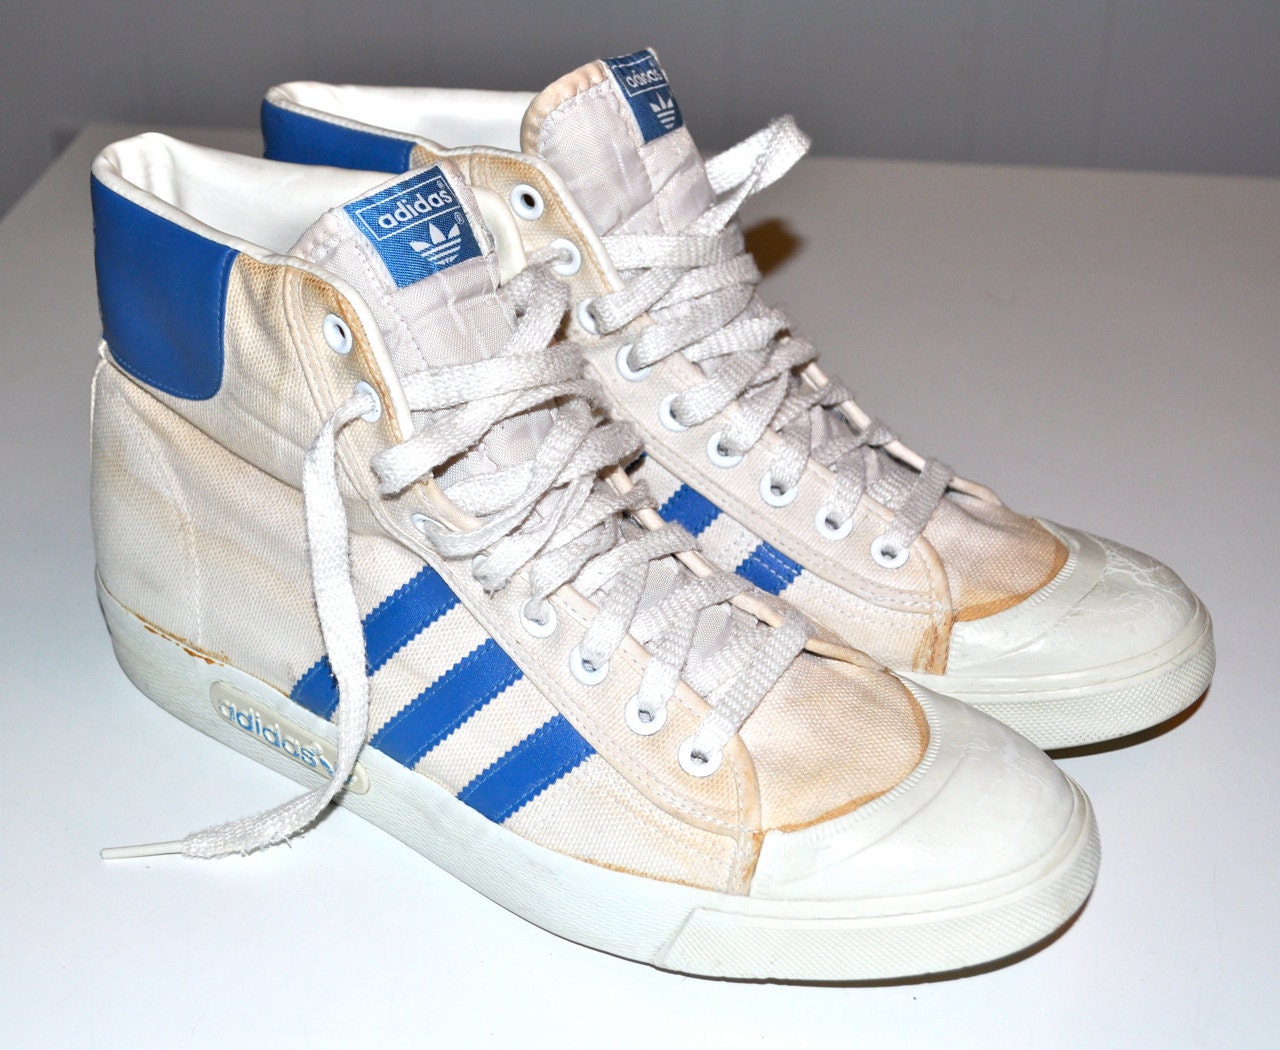 ADIDAS 1980s Top Sneakers Basketball Shoes Canvas - Etsy